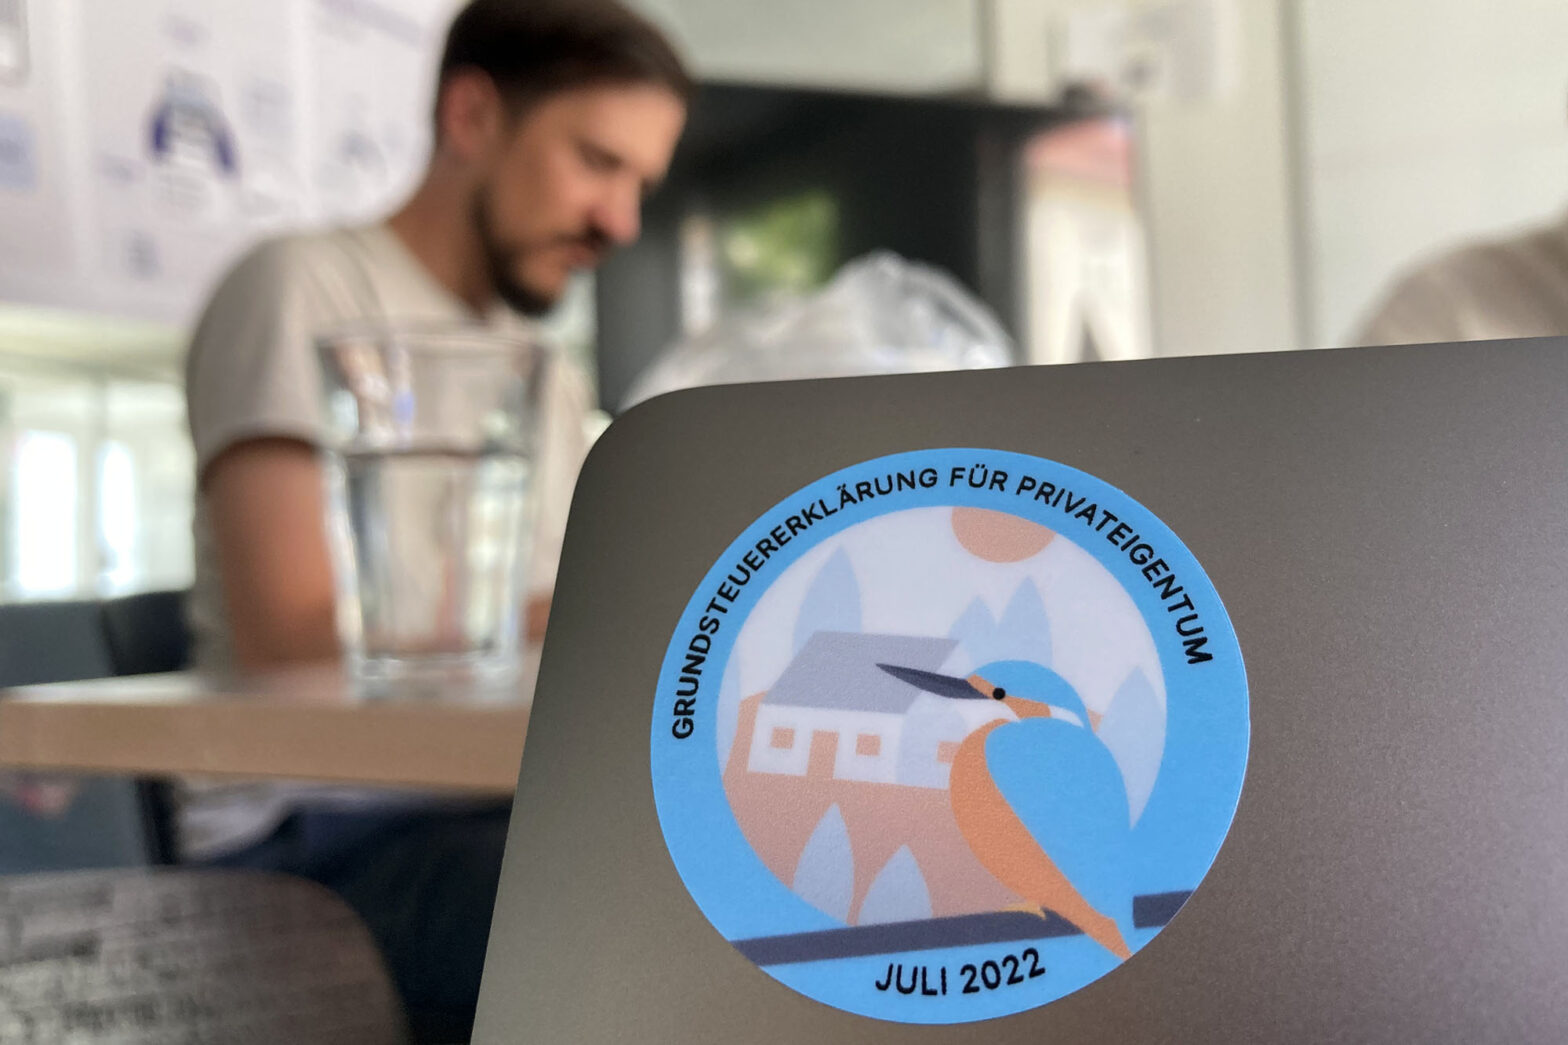 A circular sticker on a laptop computer with a common kingfisher in front of a house that says: private property tax declaration – July 2022 in German and a young man sitting behind the computer